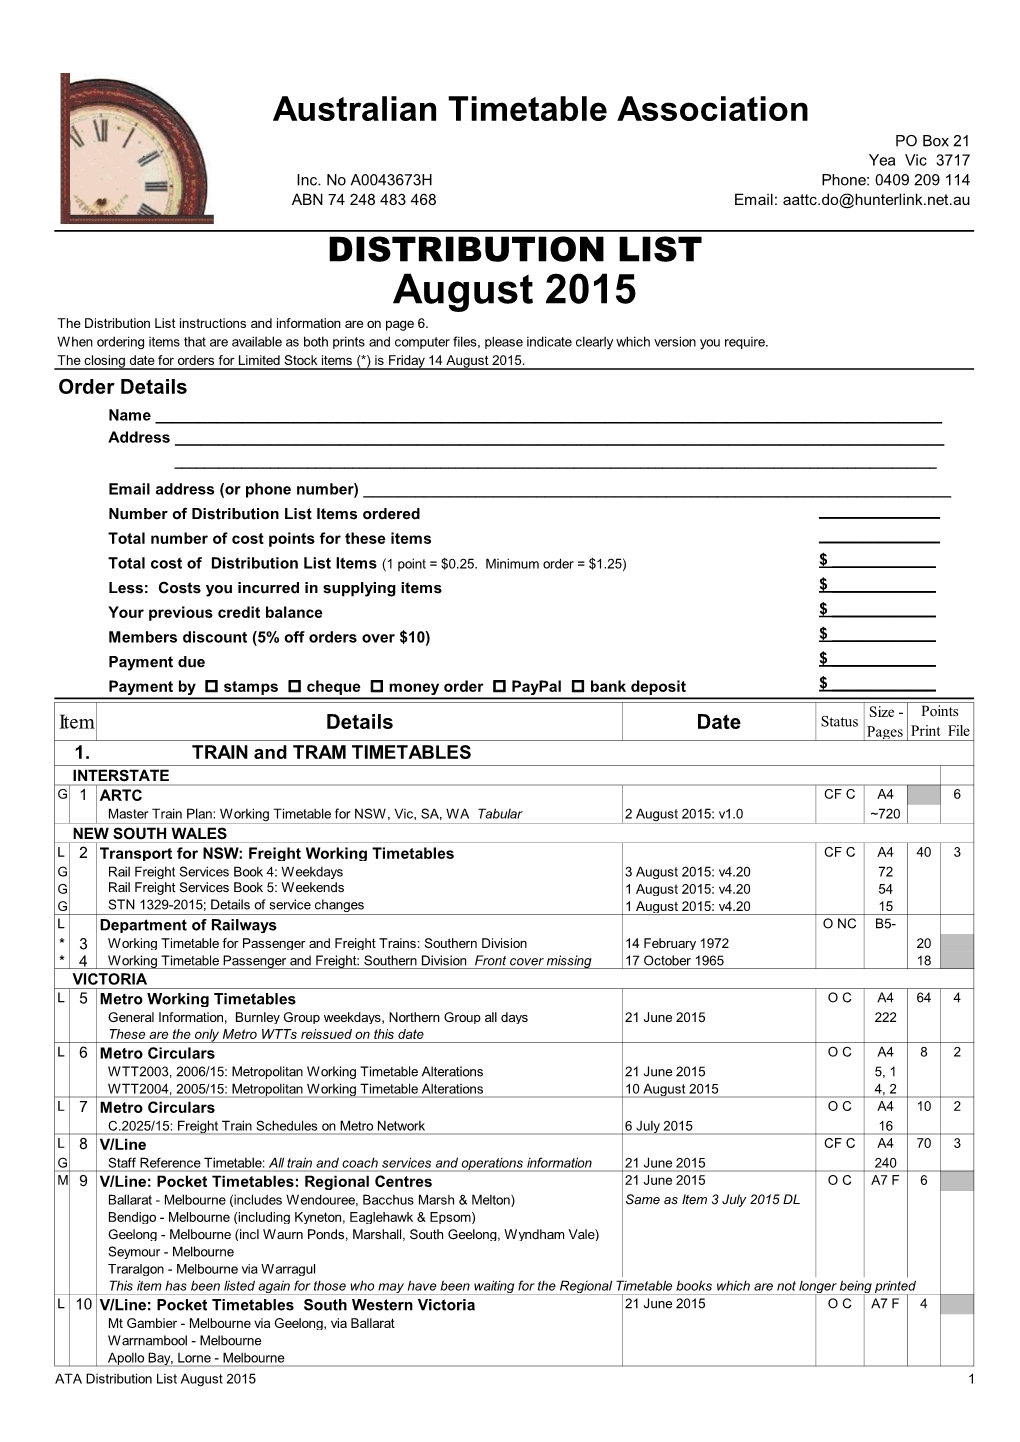 August 2015 the Distribution List Instructions and Information Are on Page 6